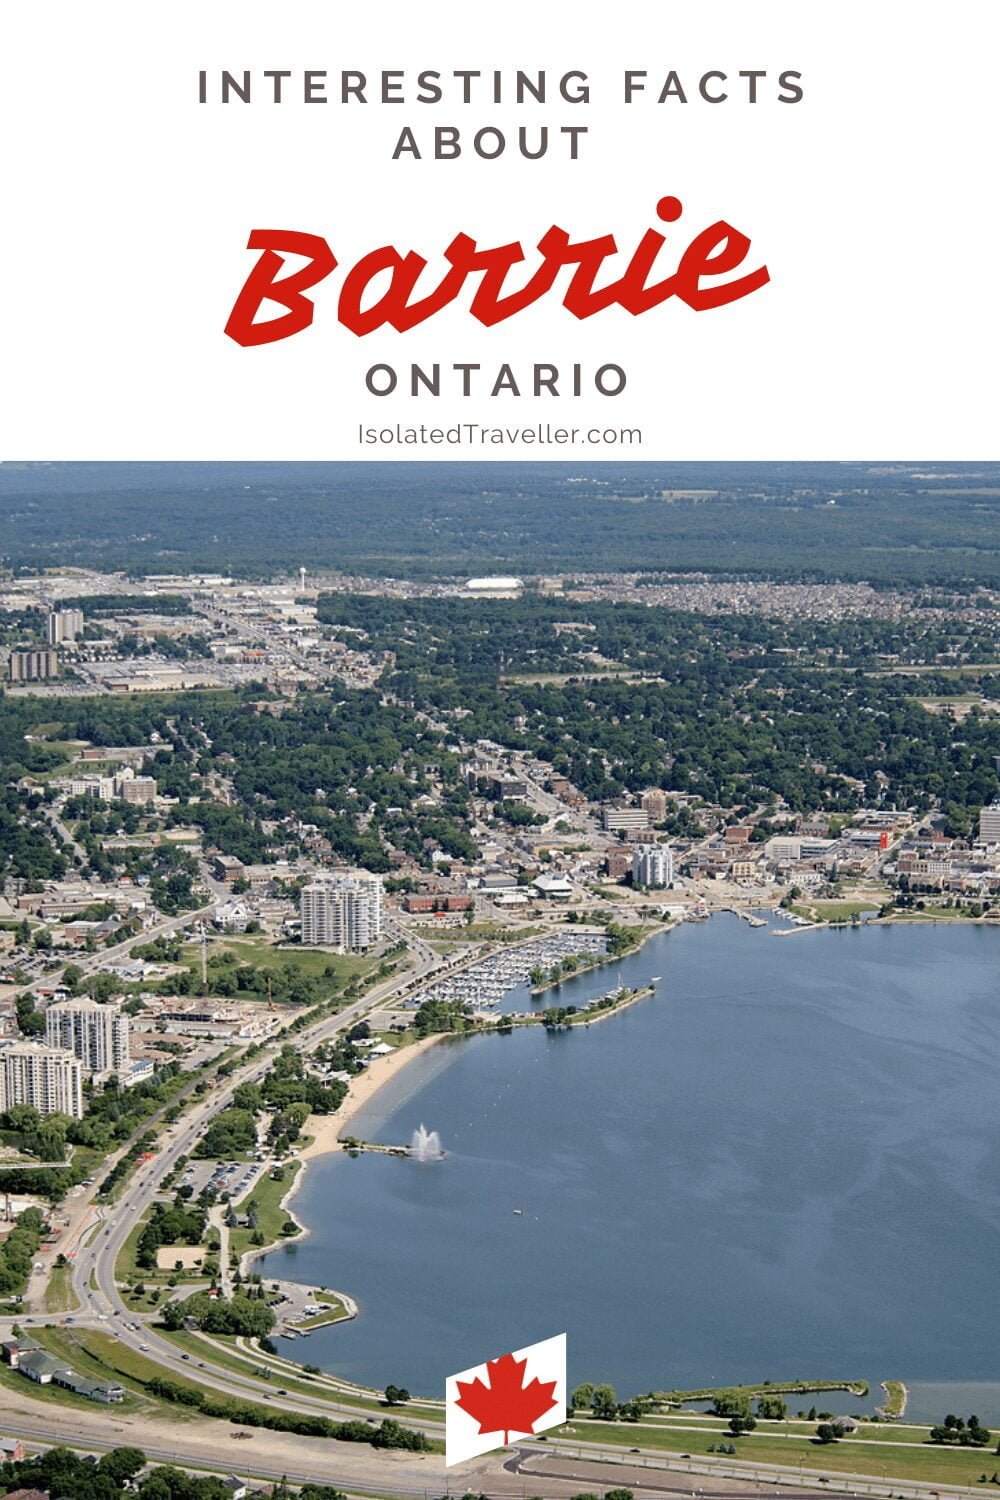 Facts About Barrie